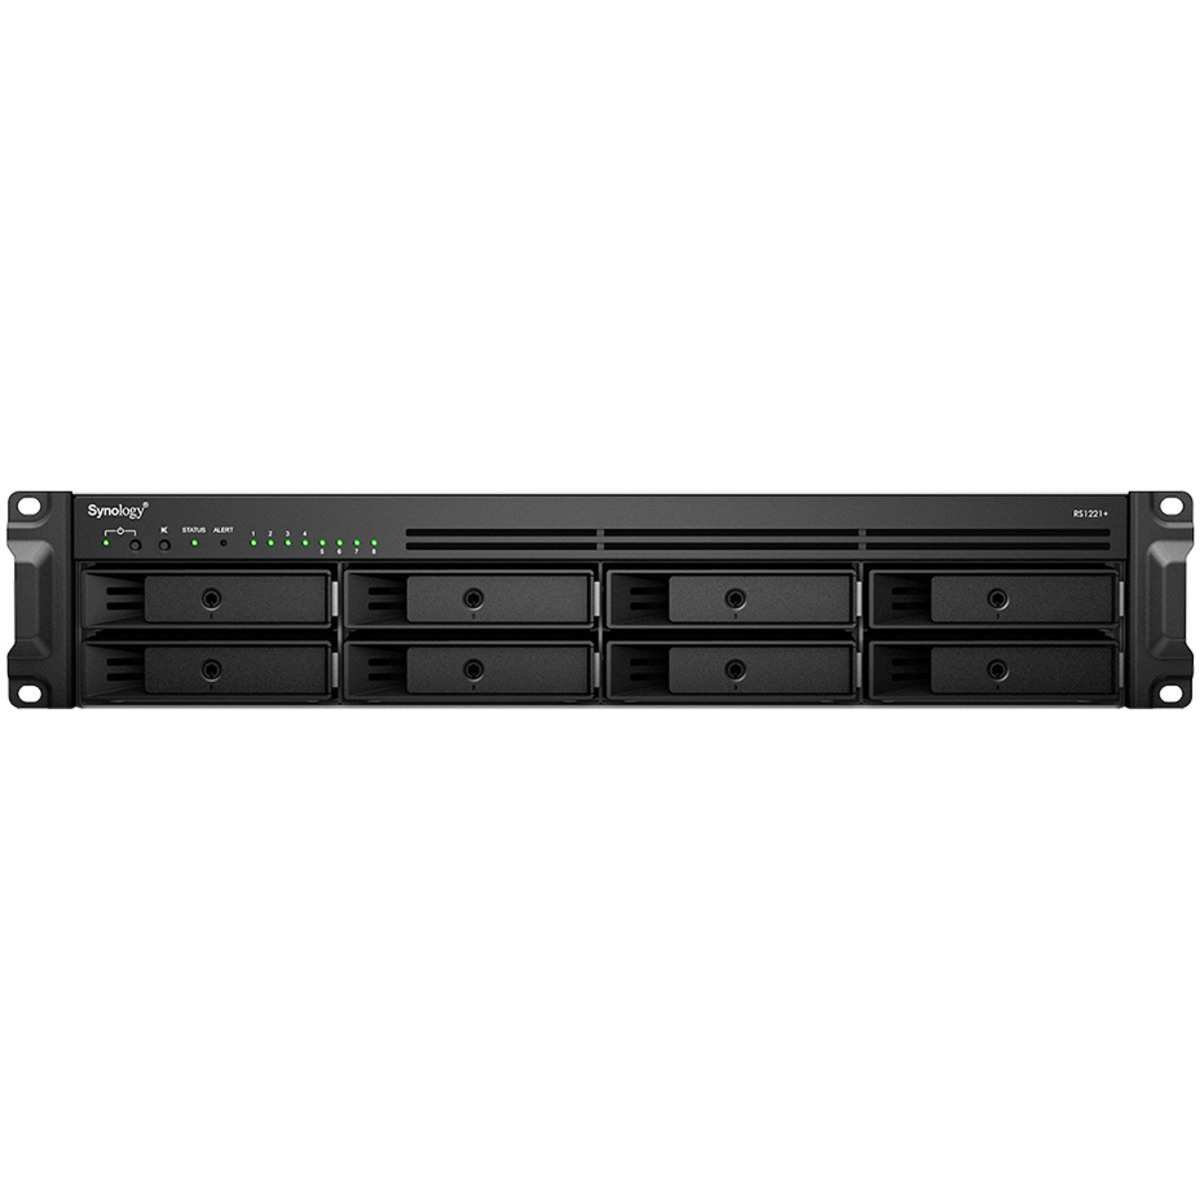 Synology RackStation RS1221+ 48tb 8-Bay RackMount Multimedia / Power User / Business NAS - Network Attached Storage Device 8x6tb Seagate BarraCuda ST6000DM003 3.5 5400rpm SATA 6Gb/s HDD CONSUMER Class Drives Installed - Burn-In Tested RackStation RS1221+